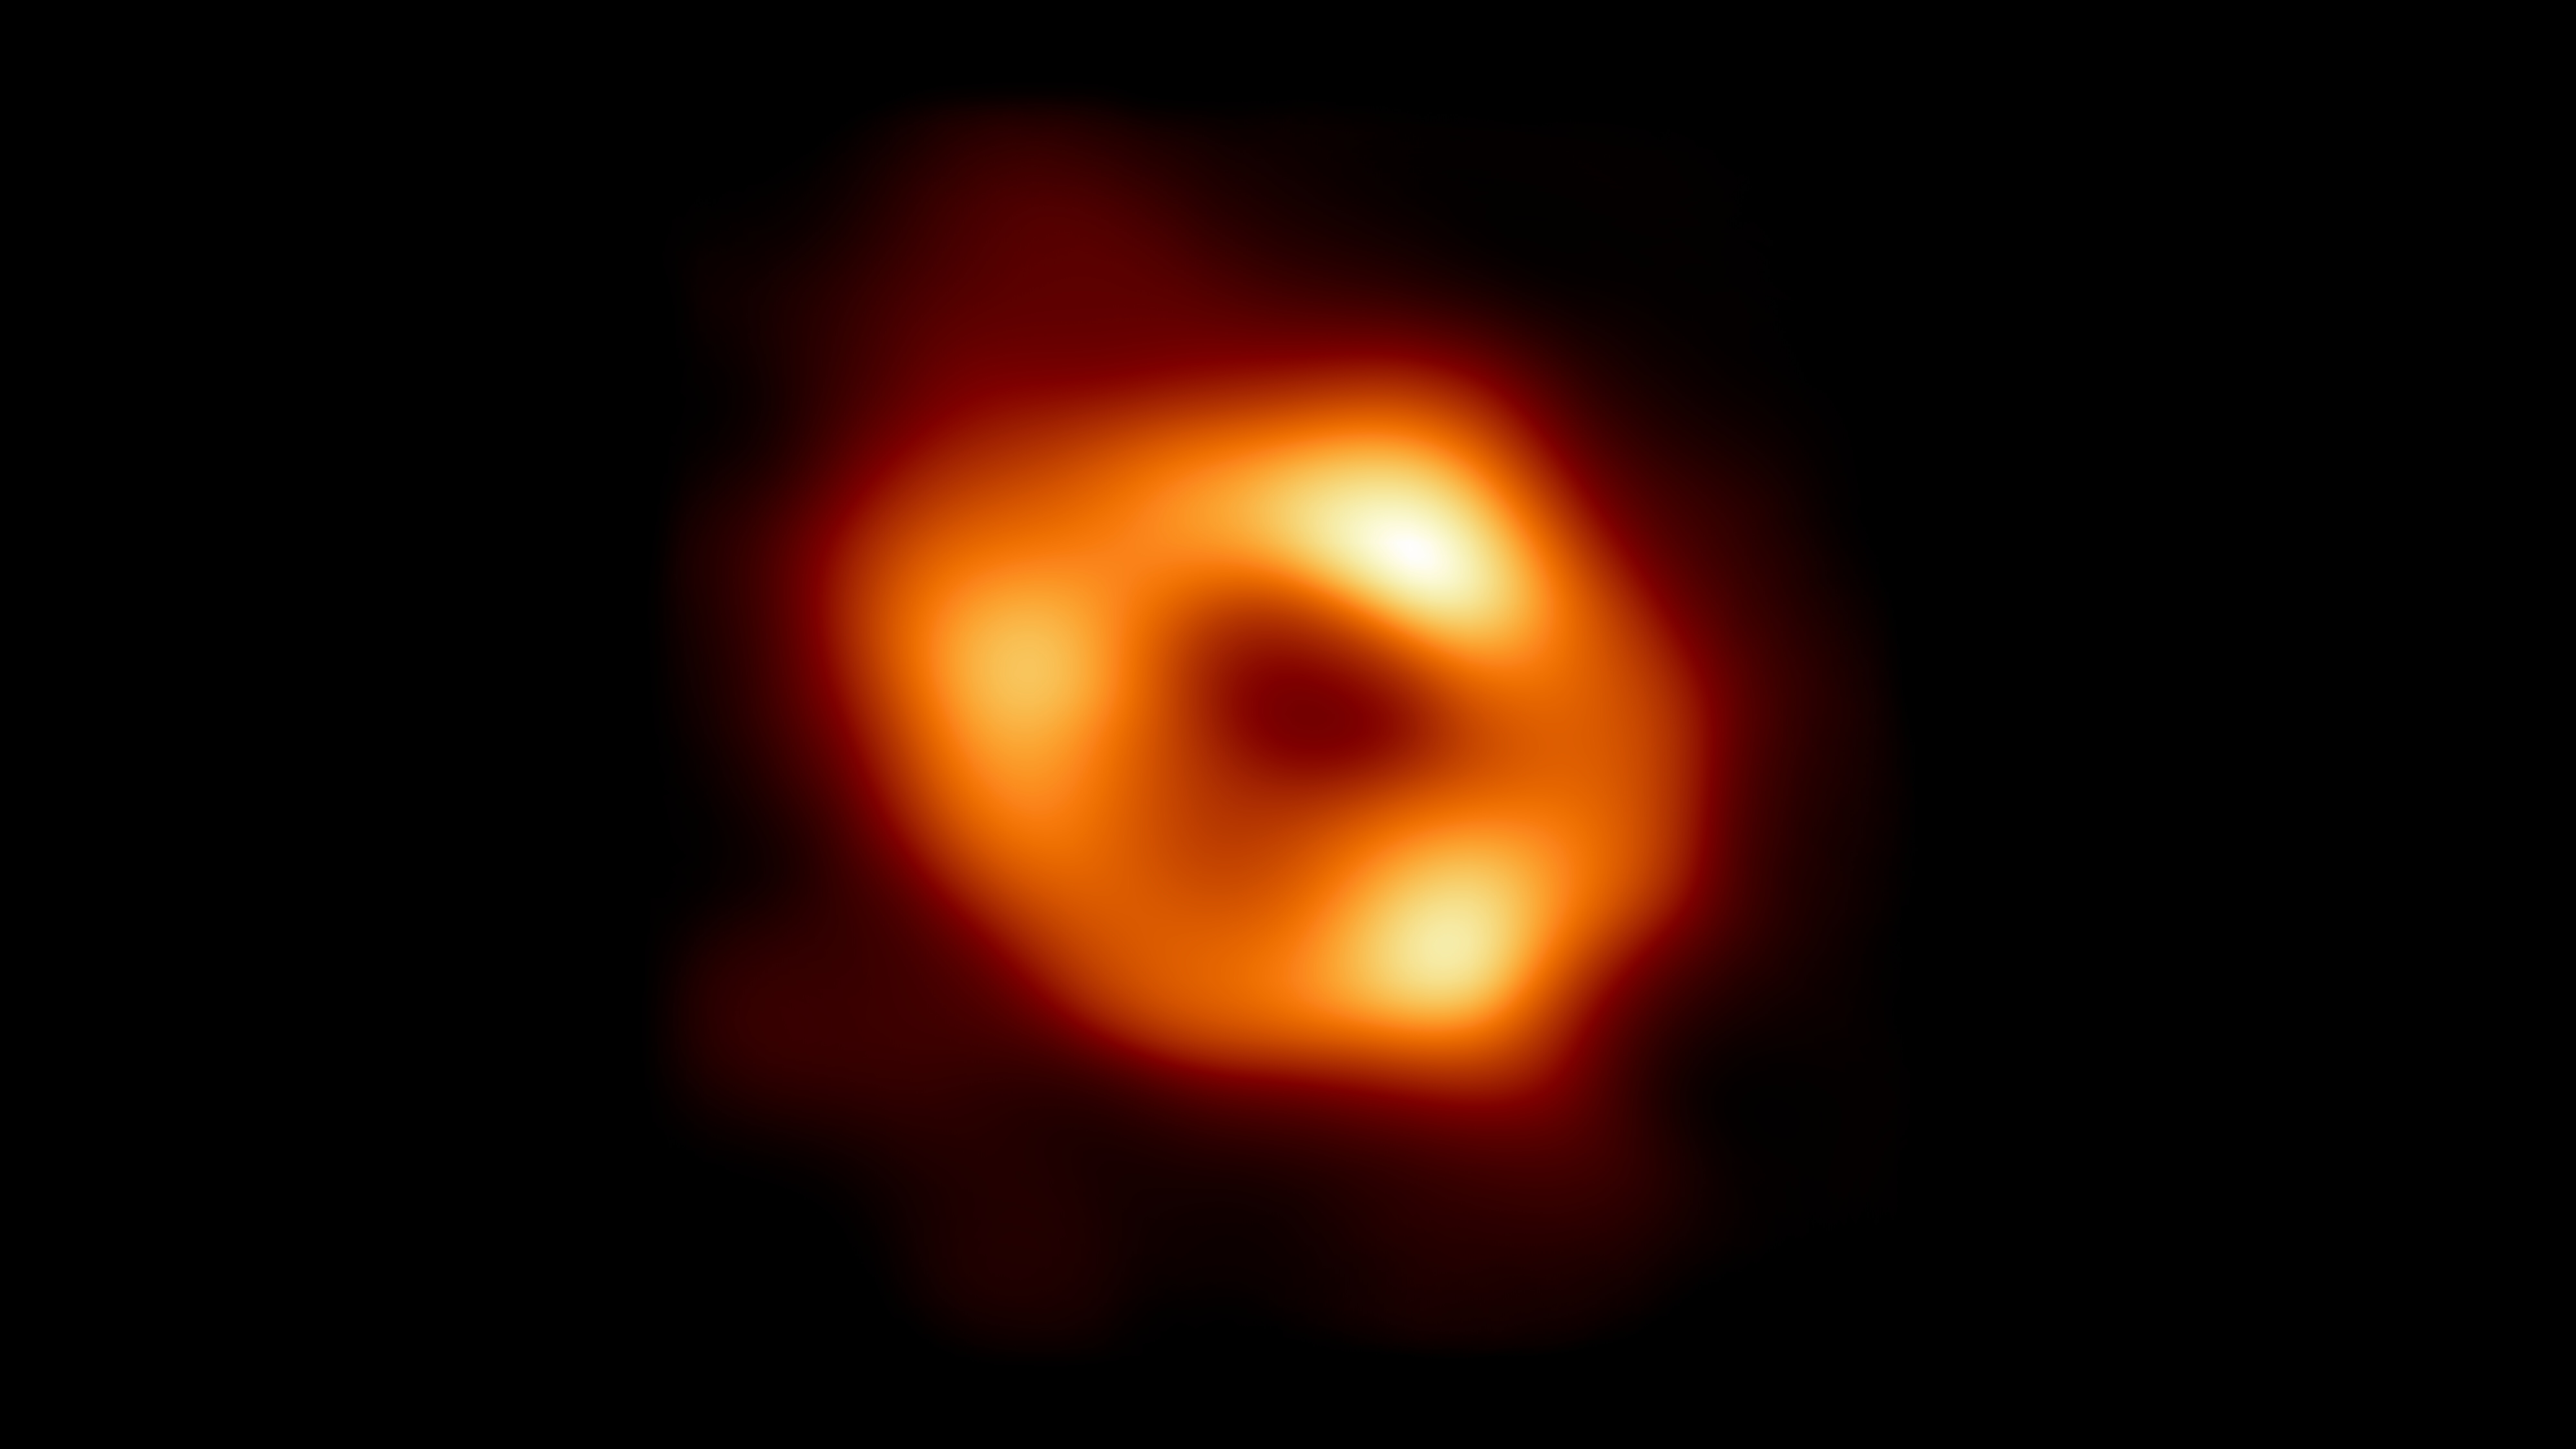 This image shows Sagittarius A*, the black hole at the center of the Milky Way galaxy.